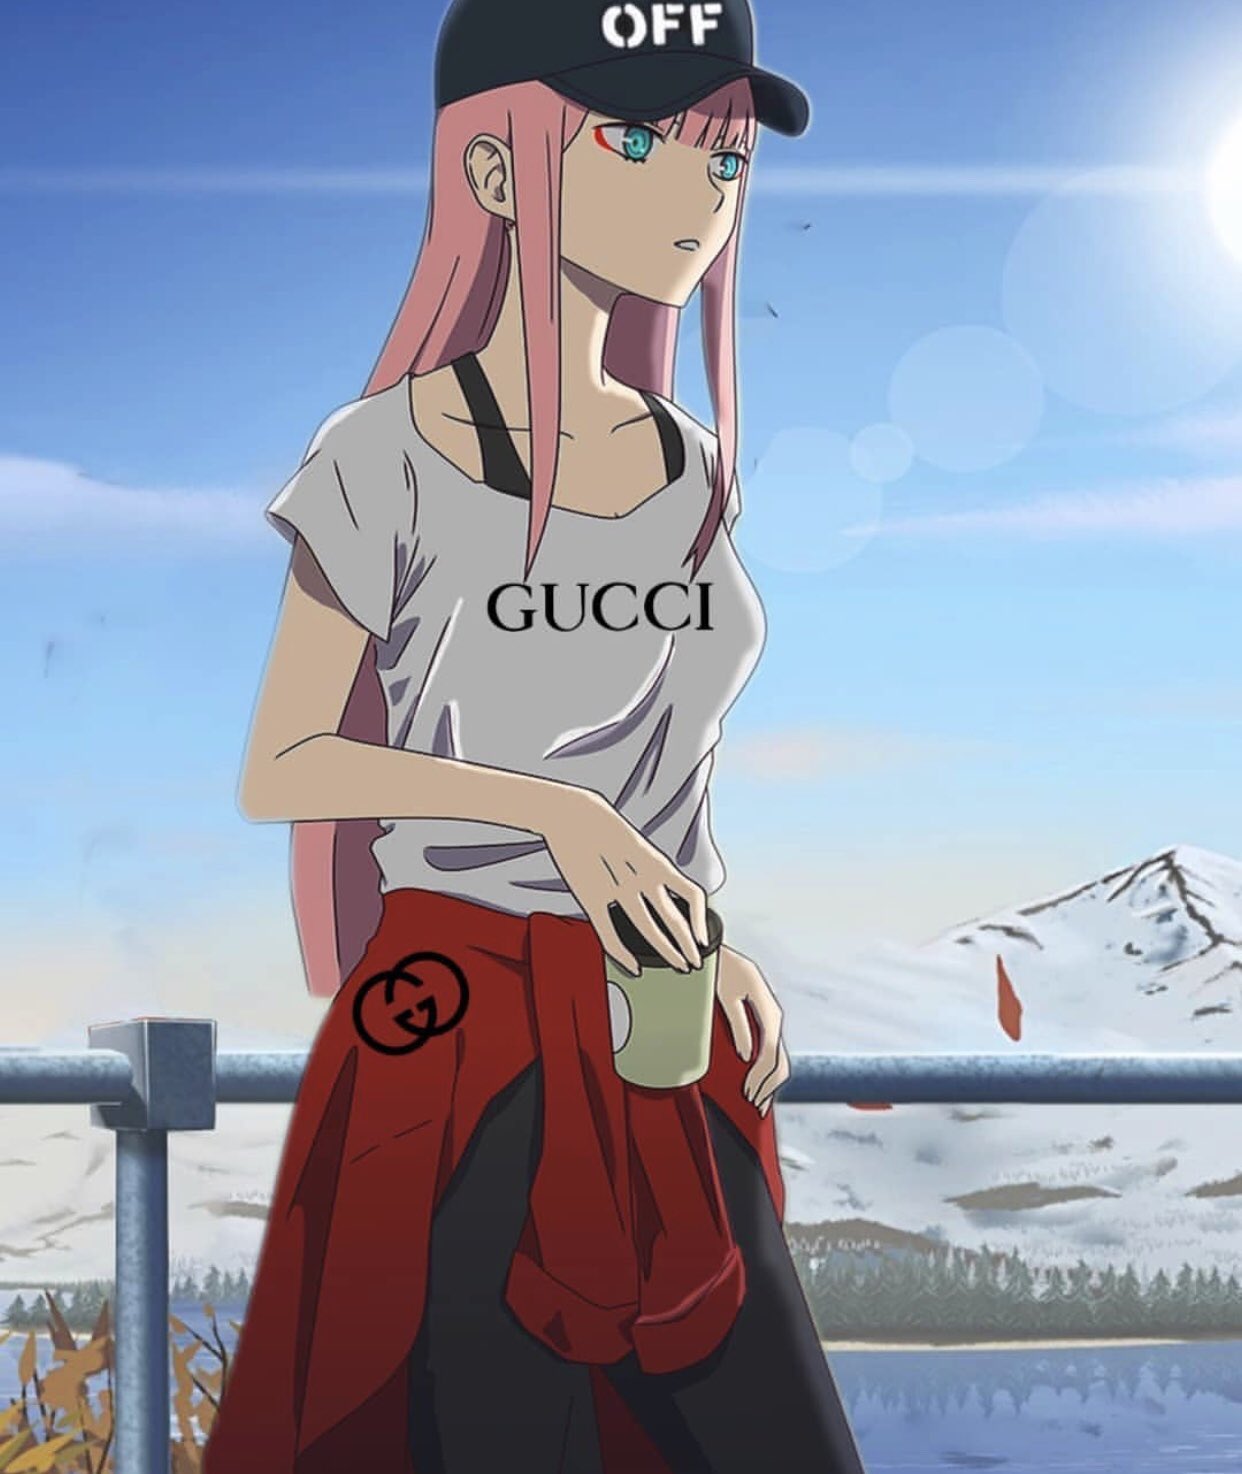 Anime_Lover on Twitter: "Zero Two rocking modern trends #zerotwo #ditf # anime #gucci https://t.co/986dlNgDfR" / Twitter